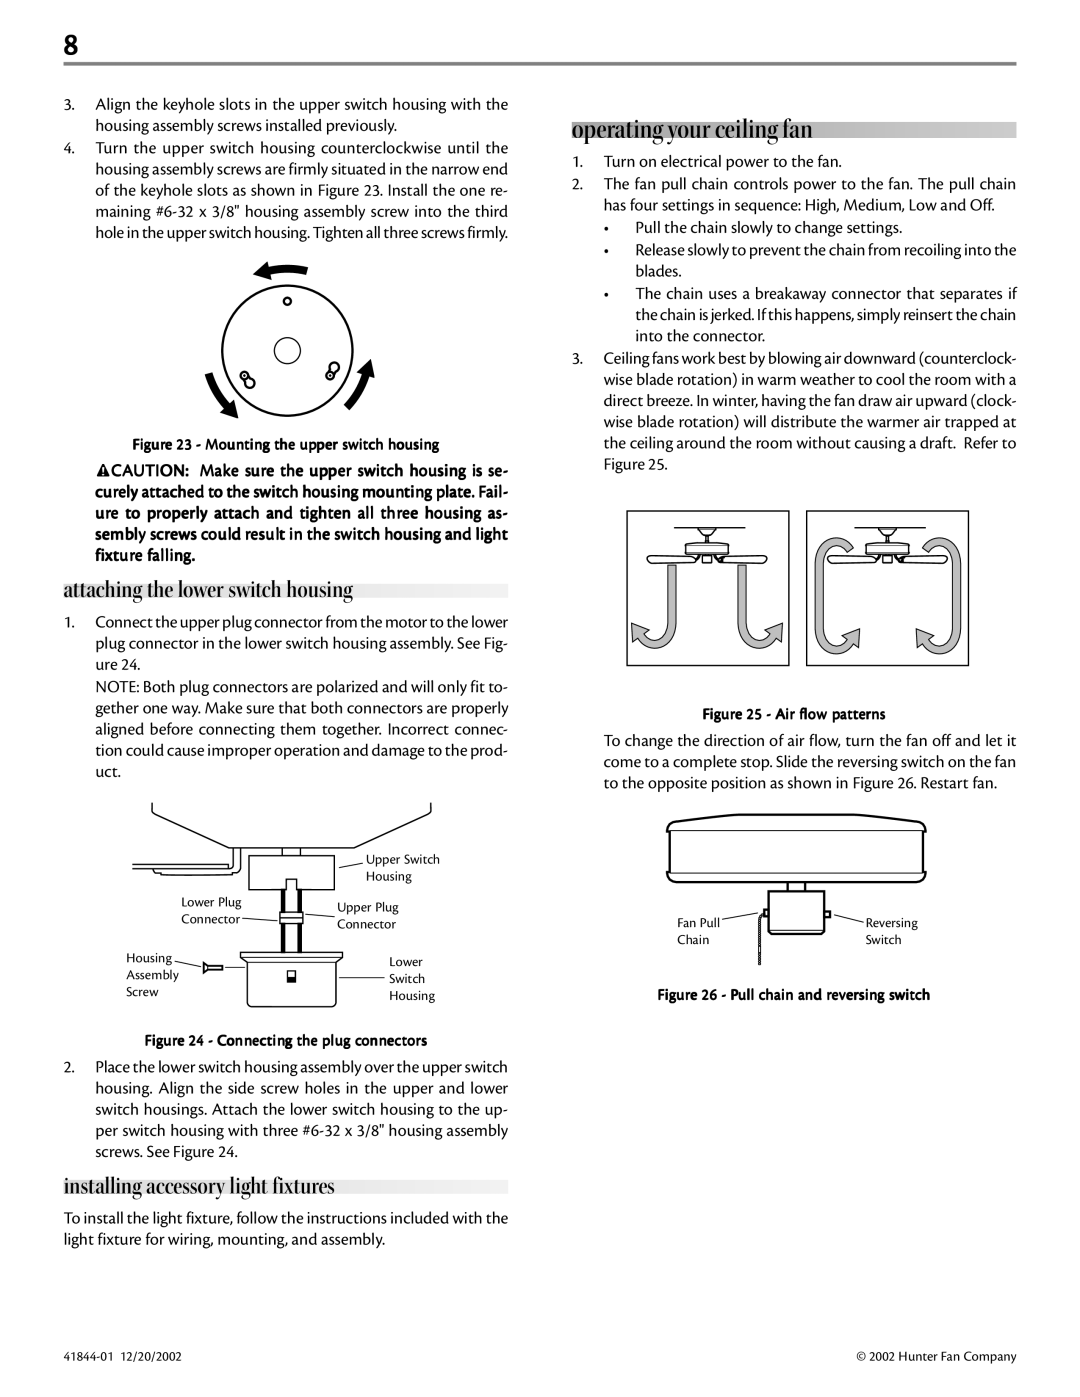 Hunter Fan 41844-01 operating your ceiling fan, attaching the lower switch housing, installing accessory light fixtures 